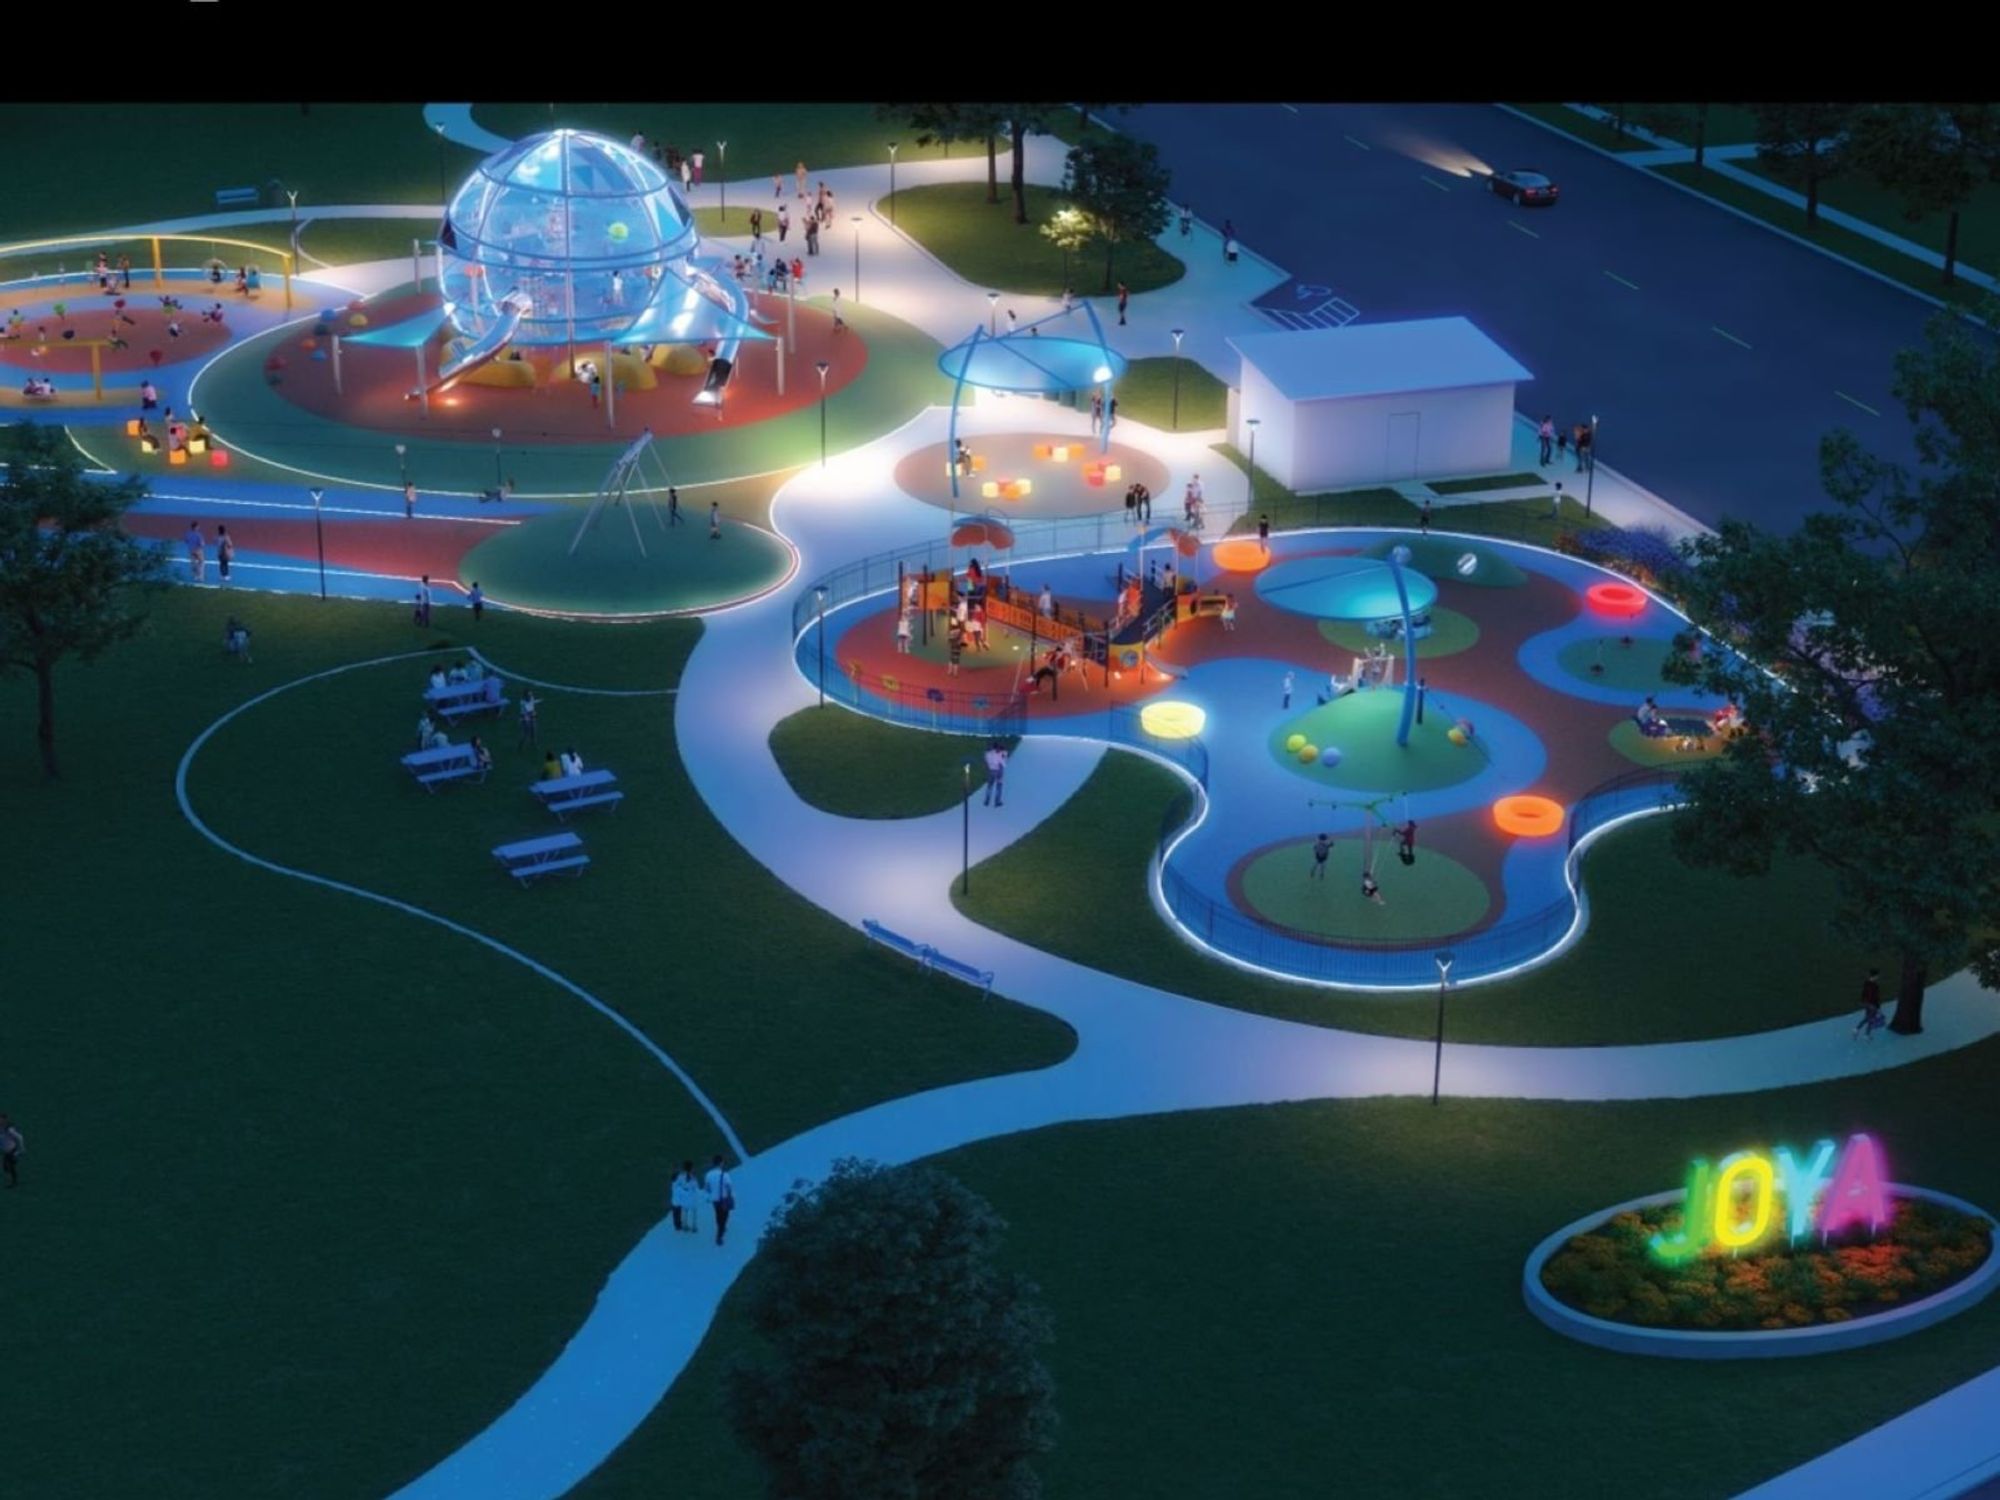 Texas' first glow-in-the-dark playground to light up in Farmers Branch -  CultureMap Dallas